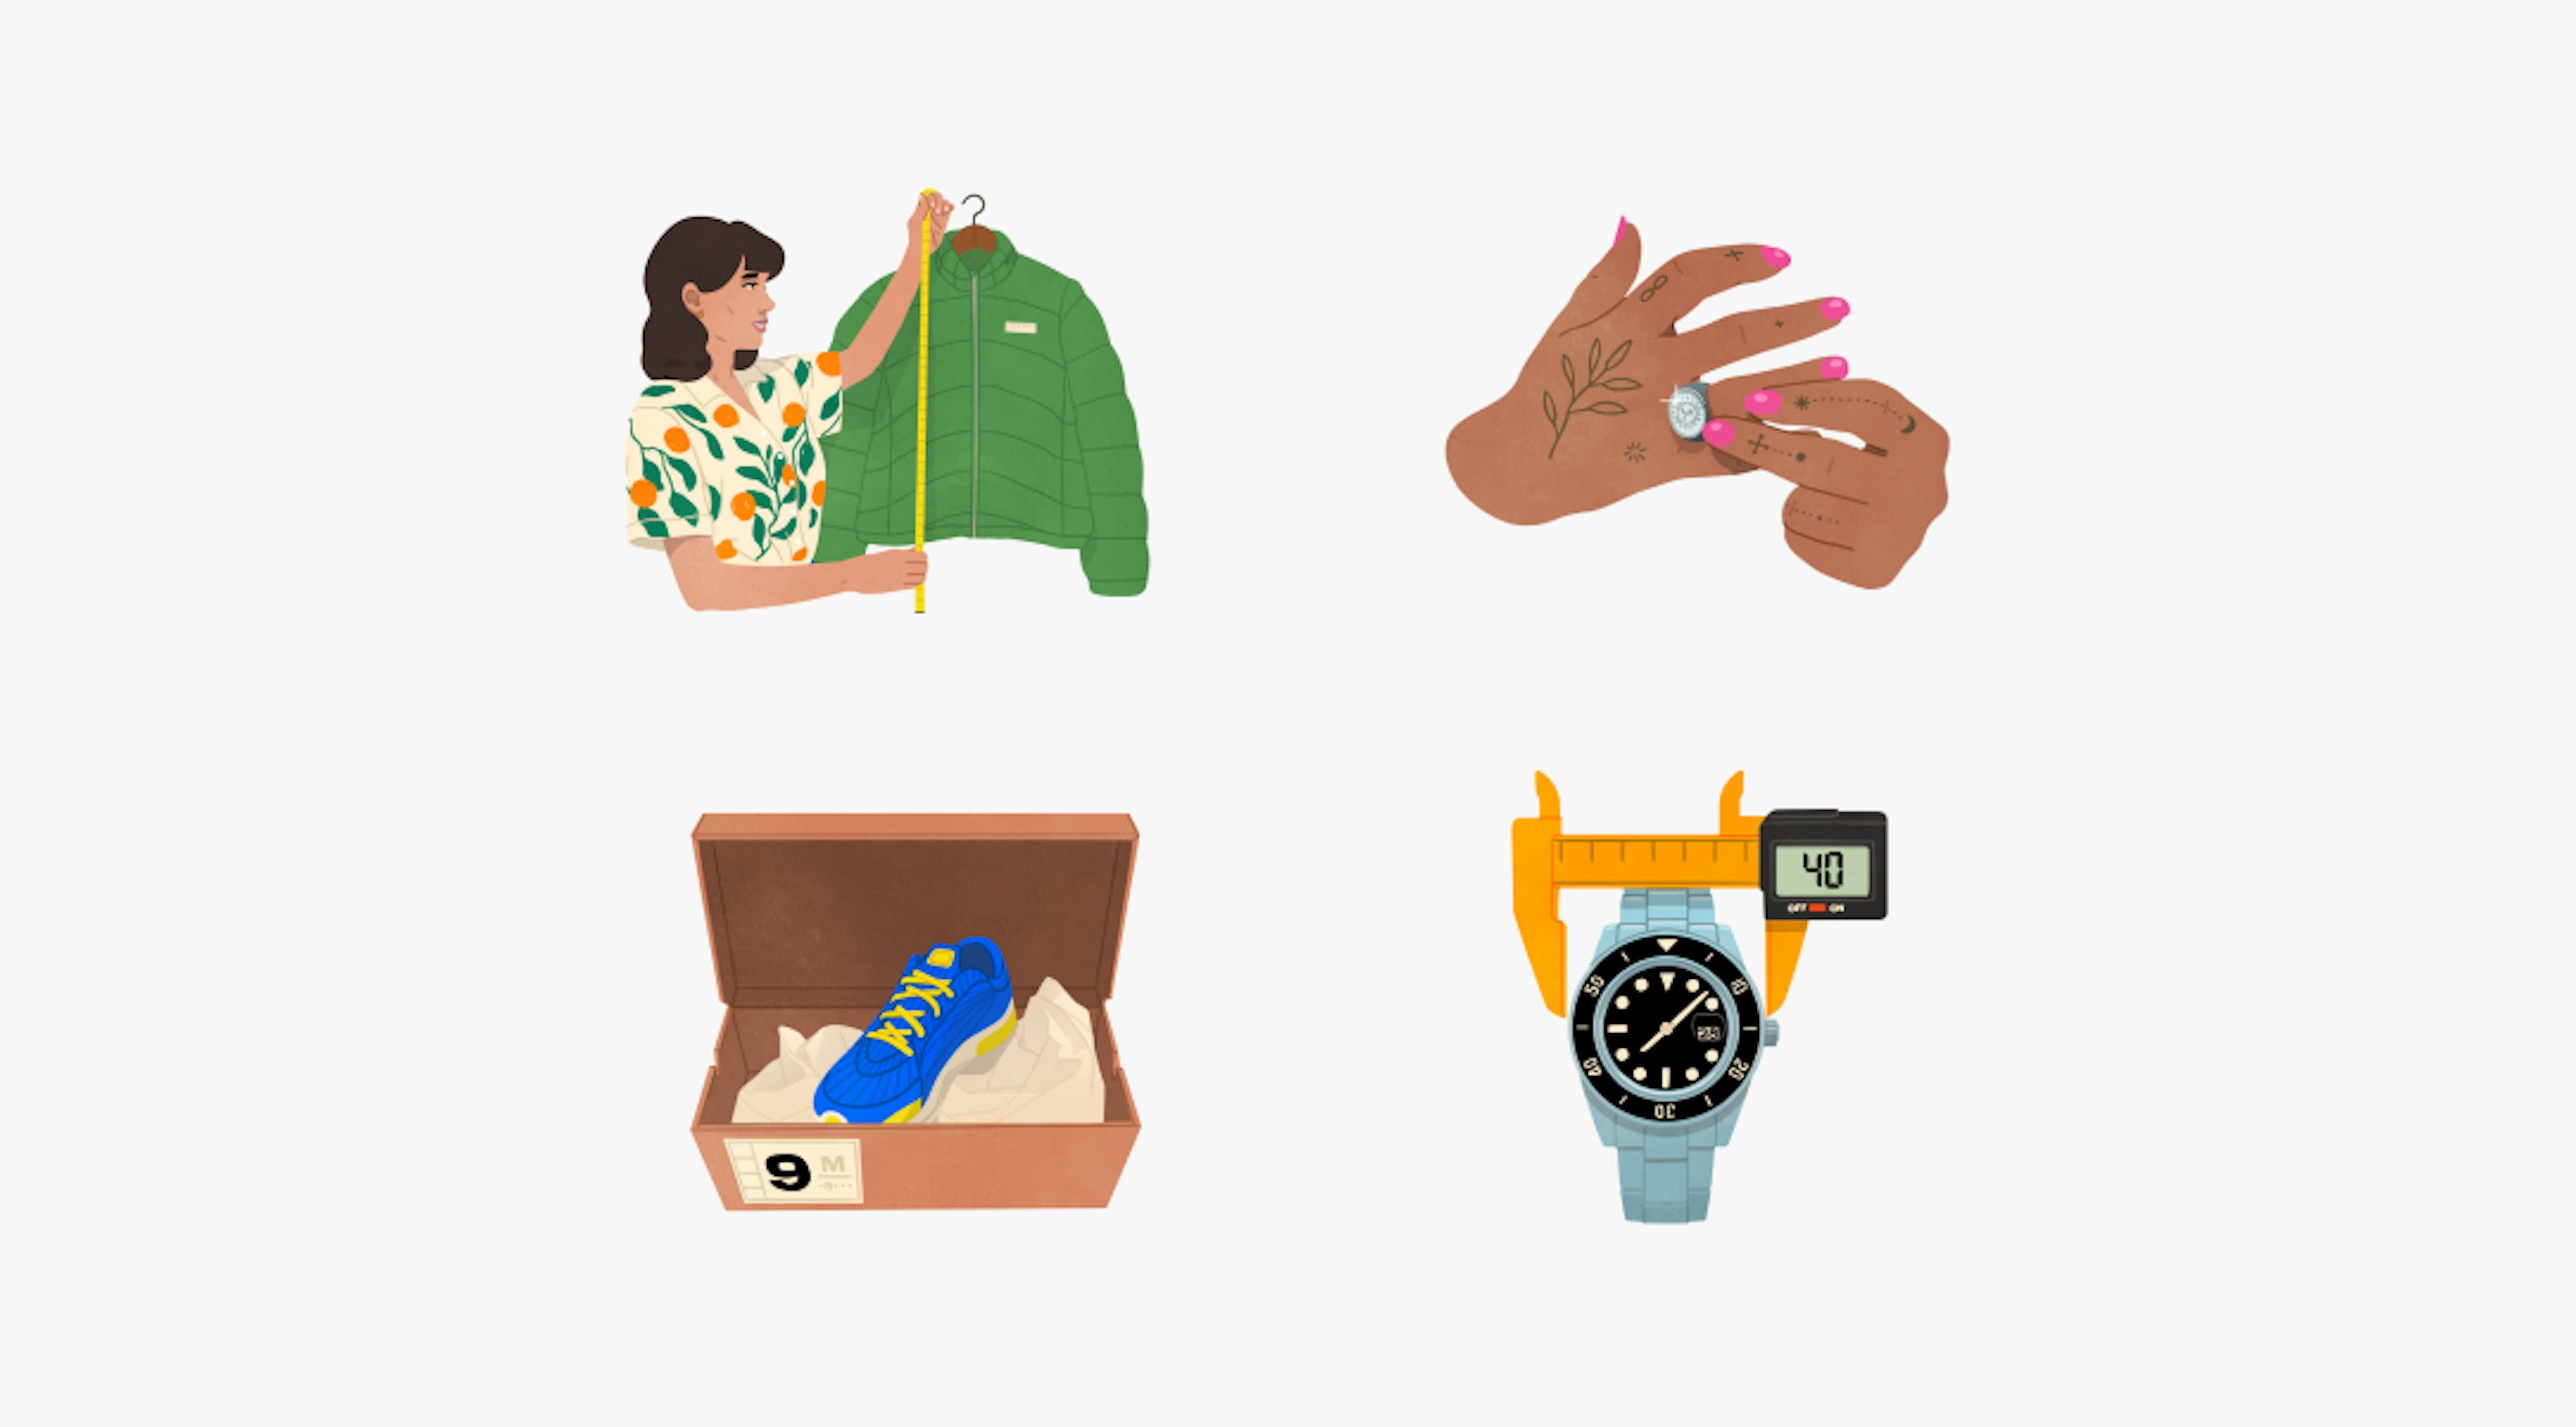 4 distinct illustrations highlighting personalization:
A woman in a patterned shirt is measuring a green jacket with a yellow tape measure.
A pair of hands with tattoos and pink nail polish is holding a ring.
A blue and yellow sneaker is displayed in an open shoebox labeled "9 M."
A silver wristwatch is being measured with digital calipers, displaying "40" on the screen.